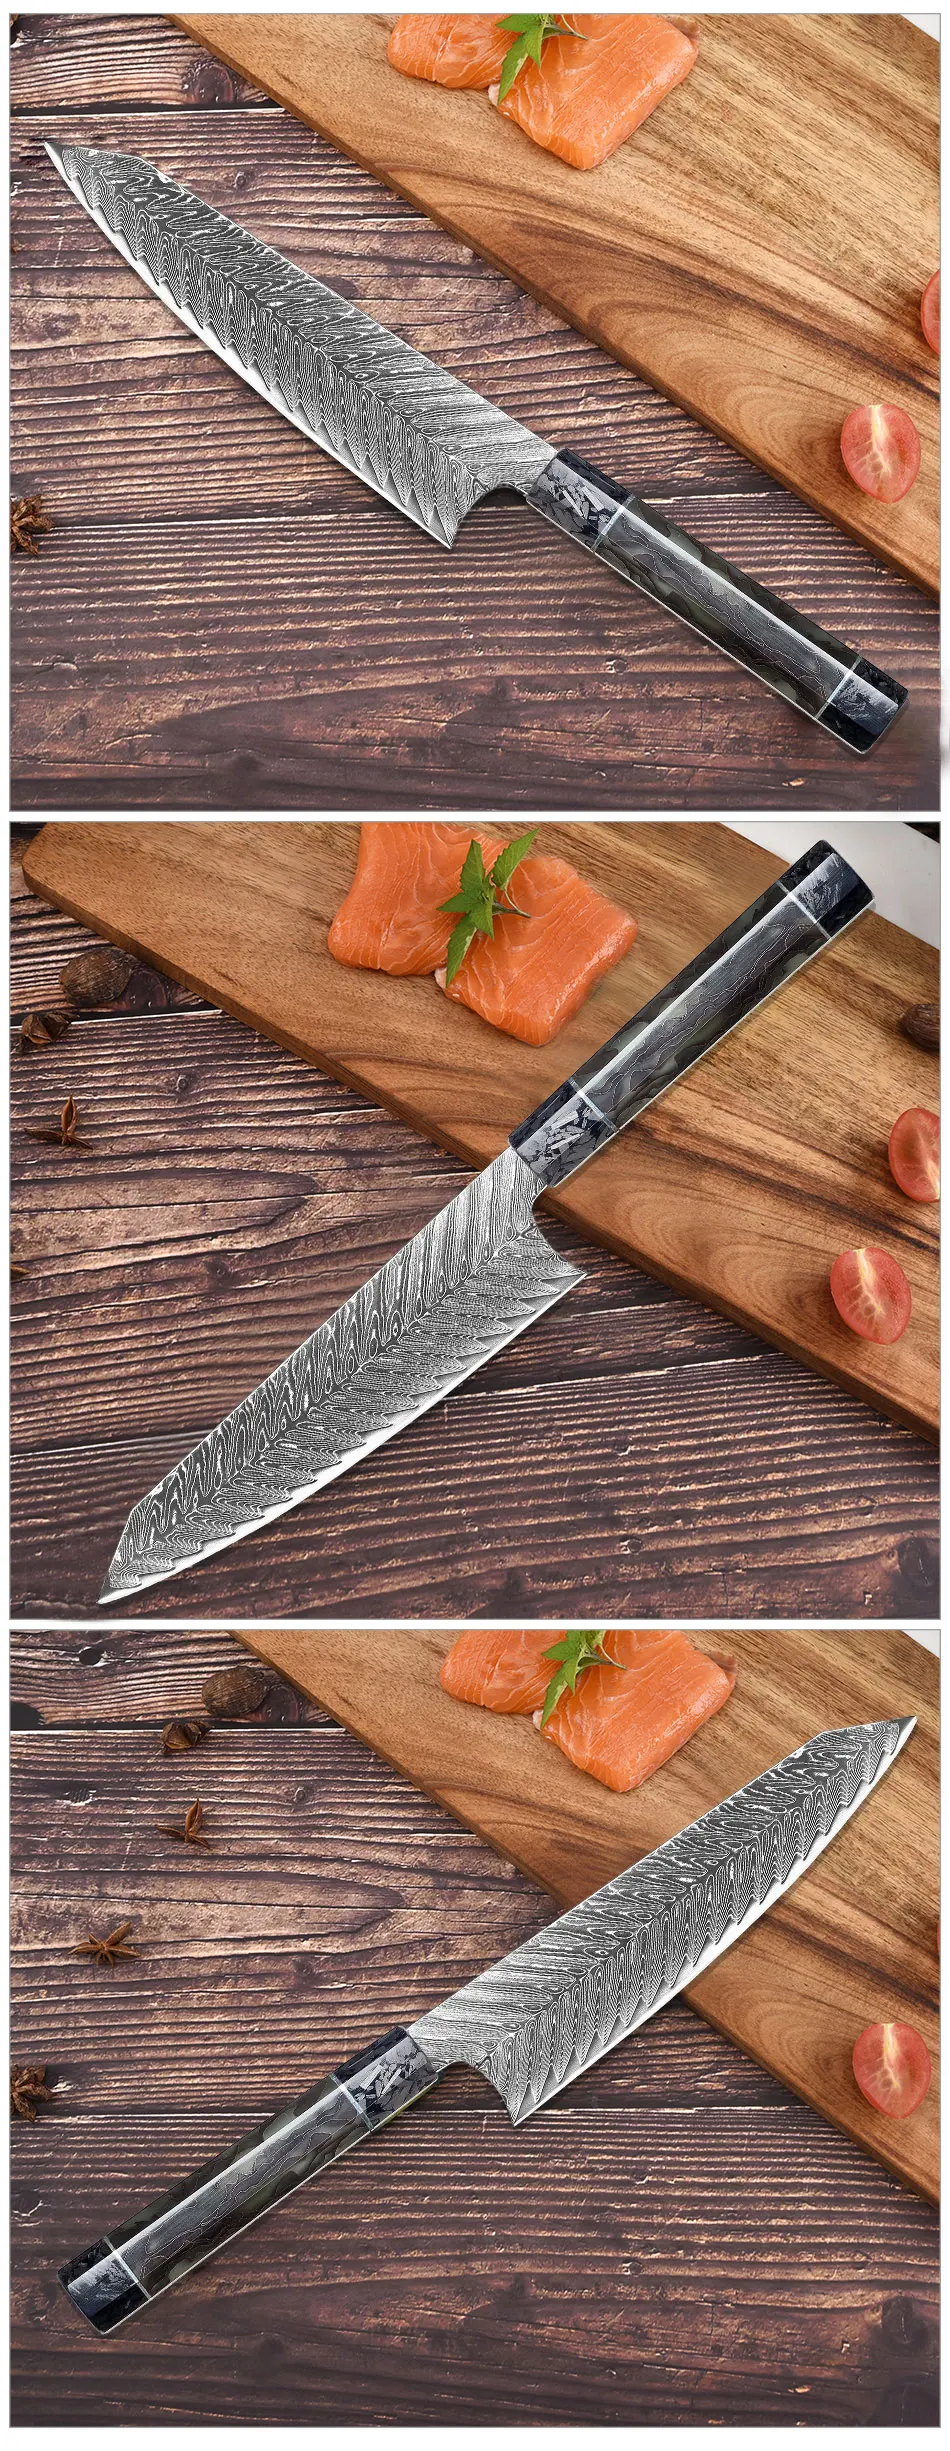 New Arrival High Quality VG10 Damascus Steel 8 Inch Chef Knife With Resin Handle